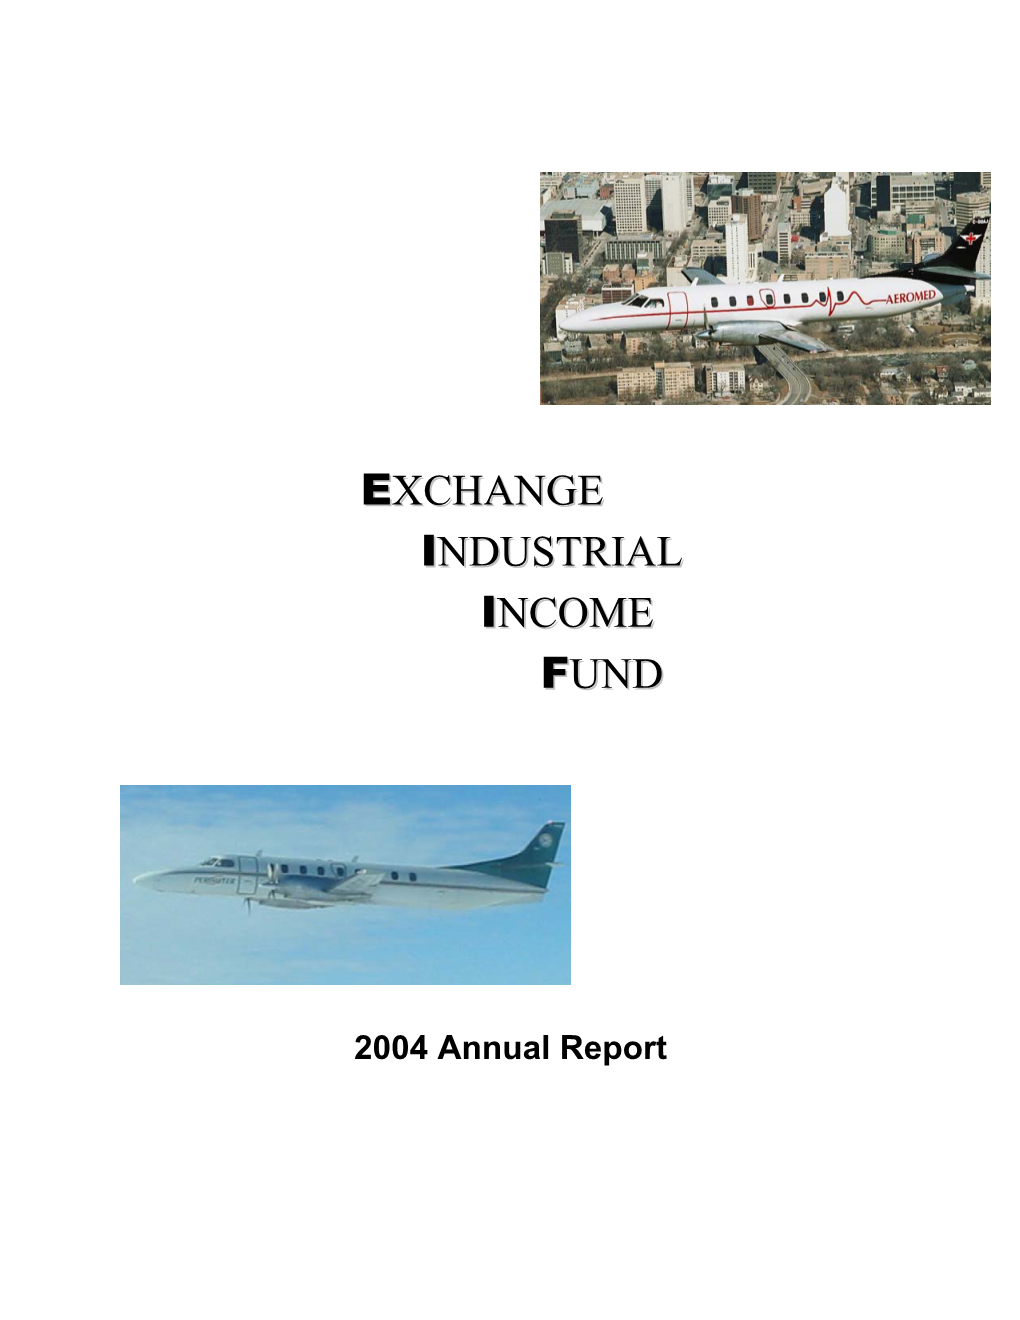 Exchange Industrial Income Fund Since Its Units Began Trading on the Toronto Venture Exchange on May 6, 2004